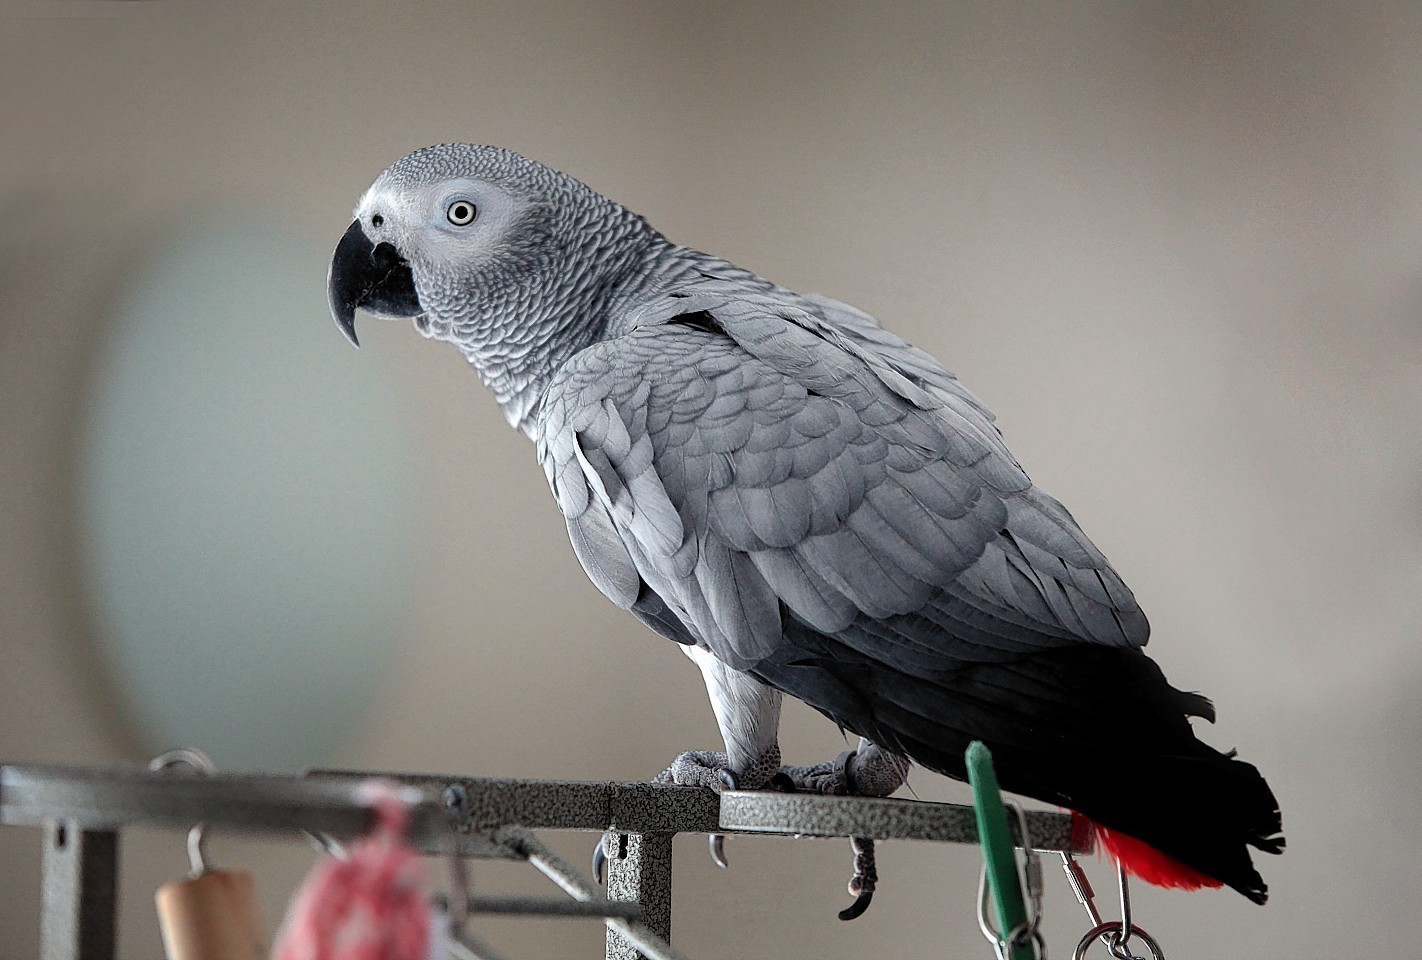 Duggy from West Lothian is an African grey parrot